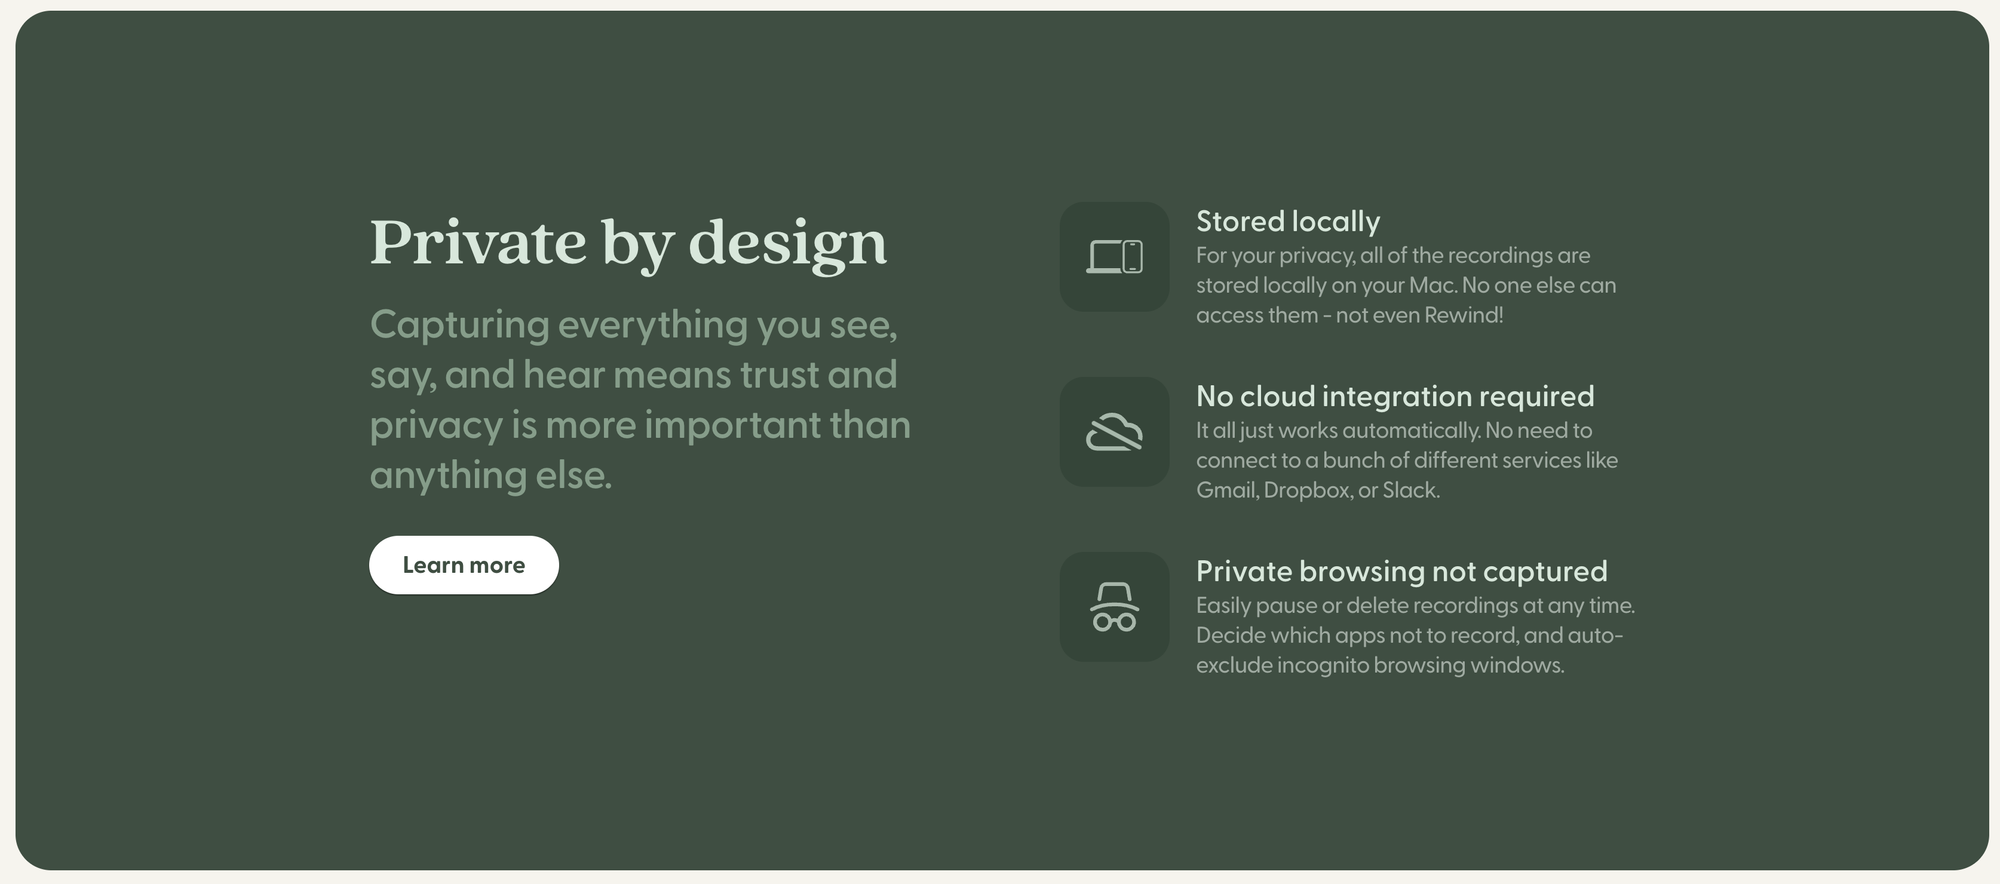 Screenshot of rewind.ai "Private by design" section on its homepage